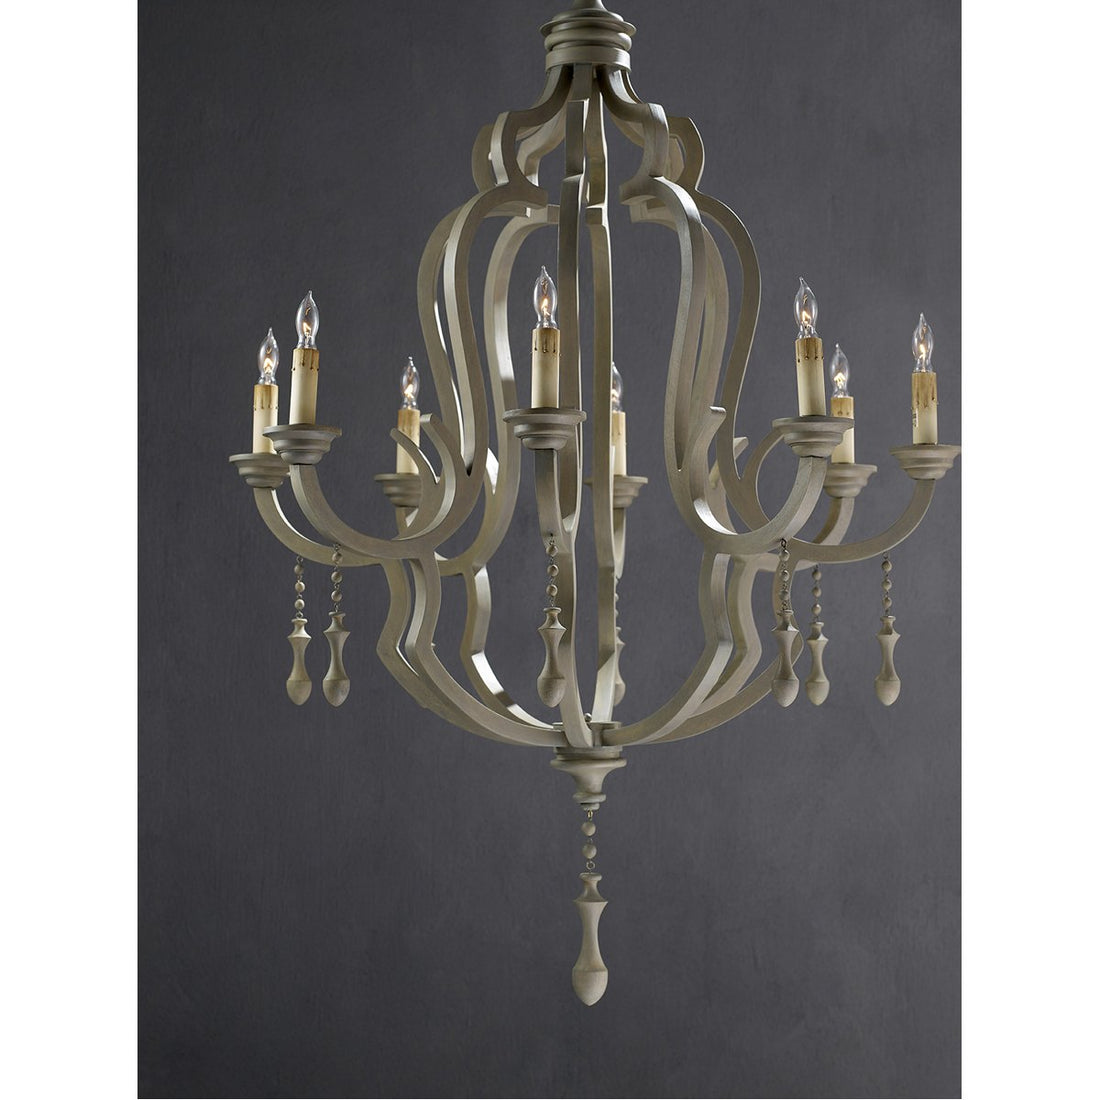 Currey and Company Waterloo Chandelier